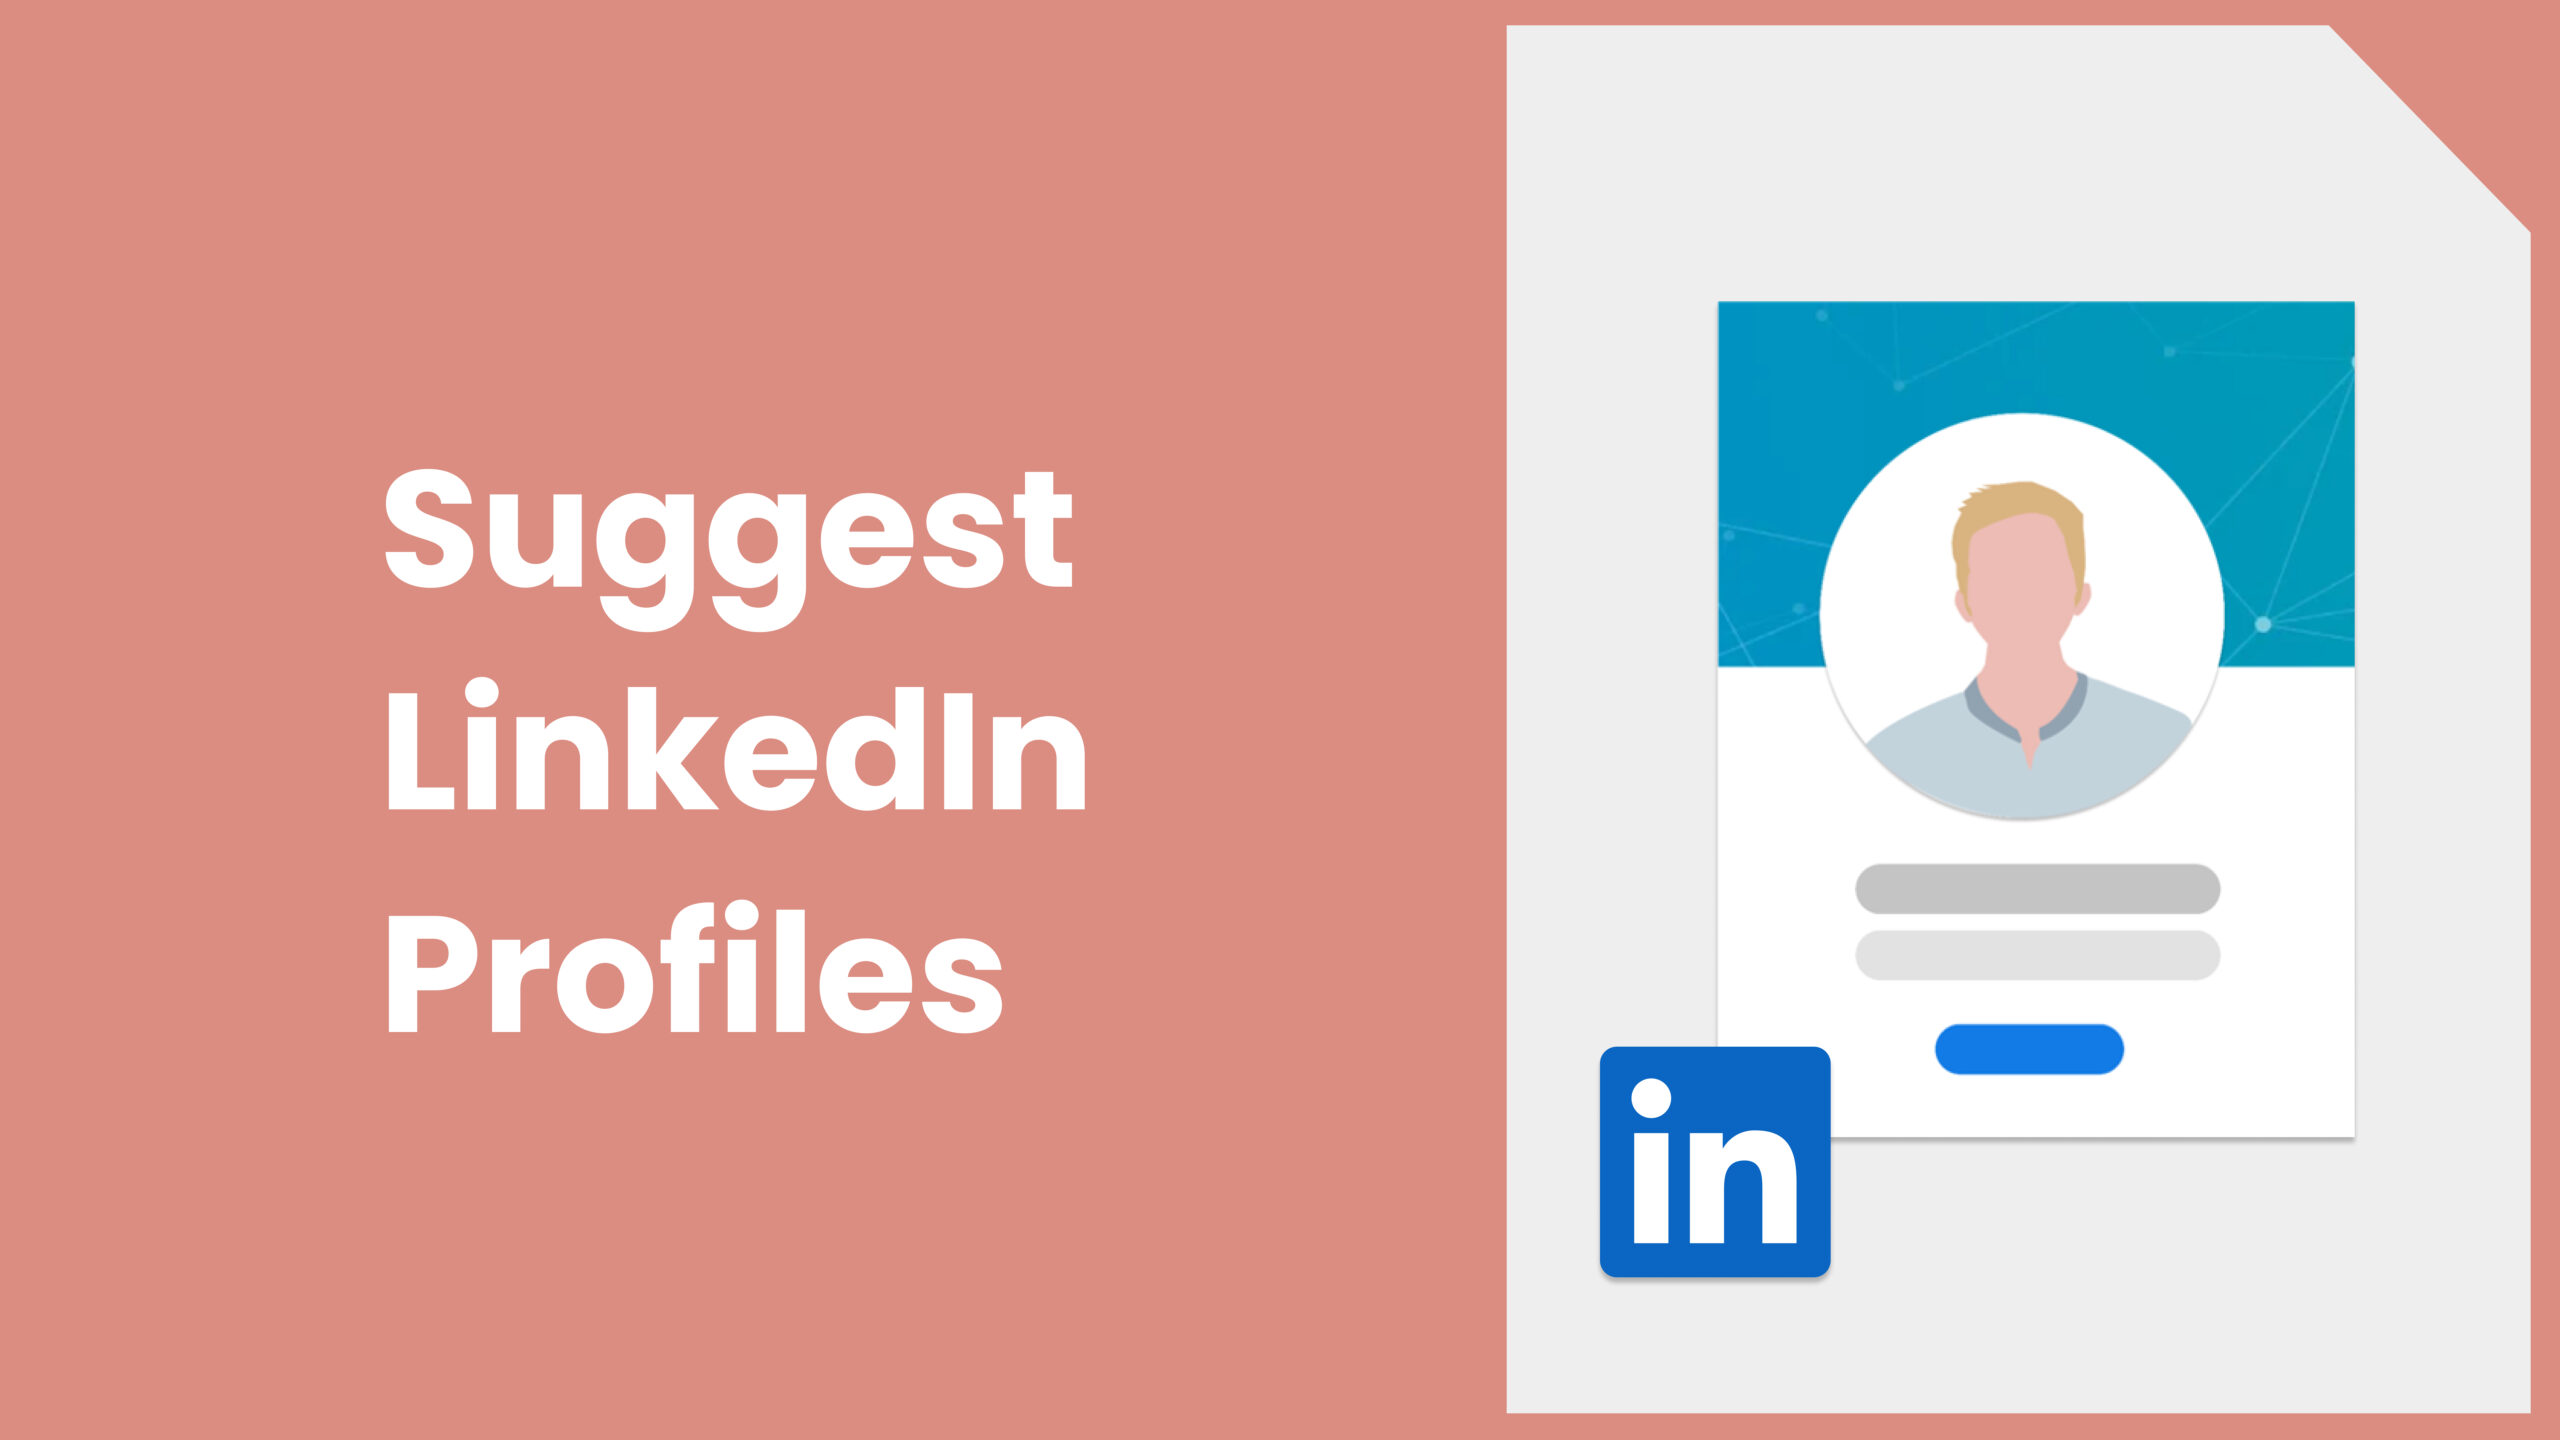 Delpha can enrich Contact data with LinkedIn profiles.